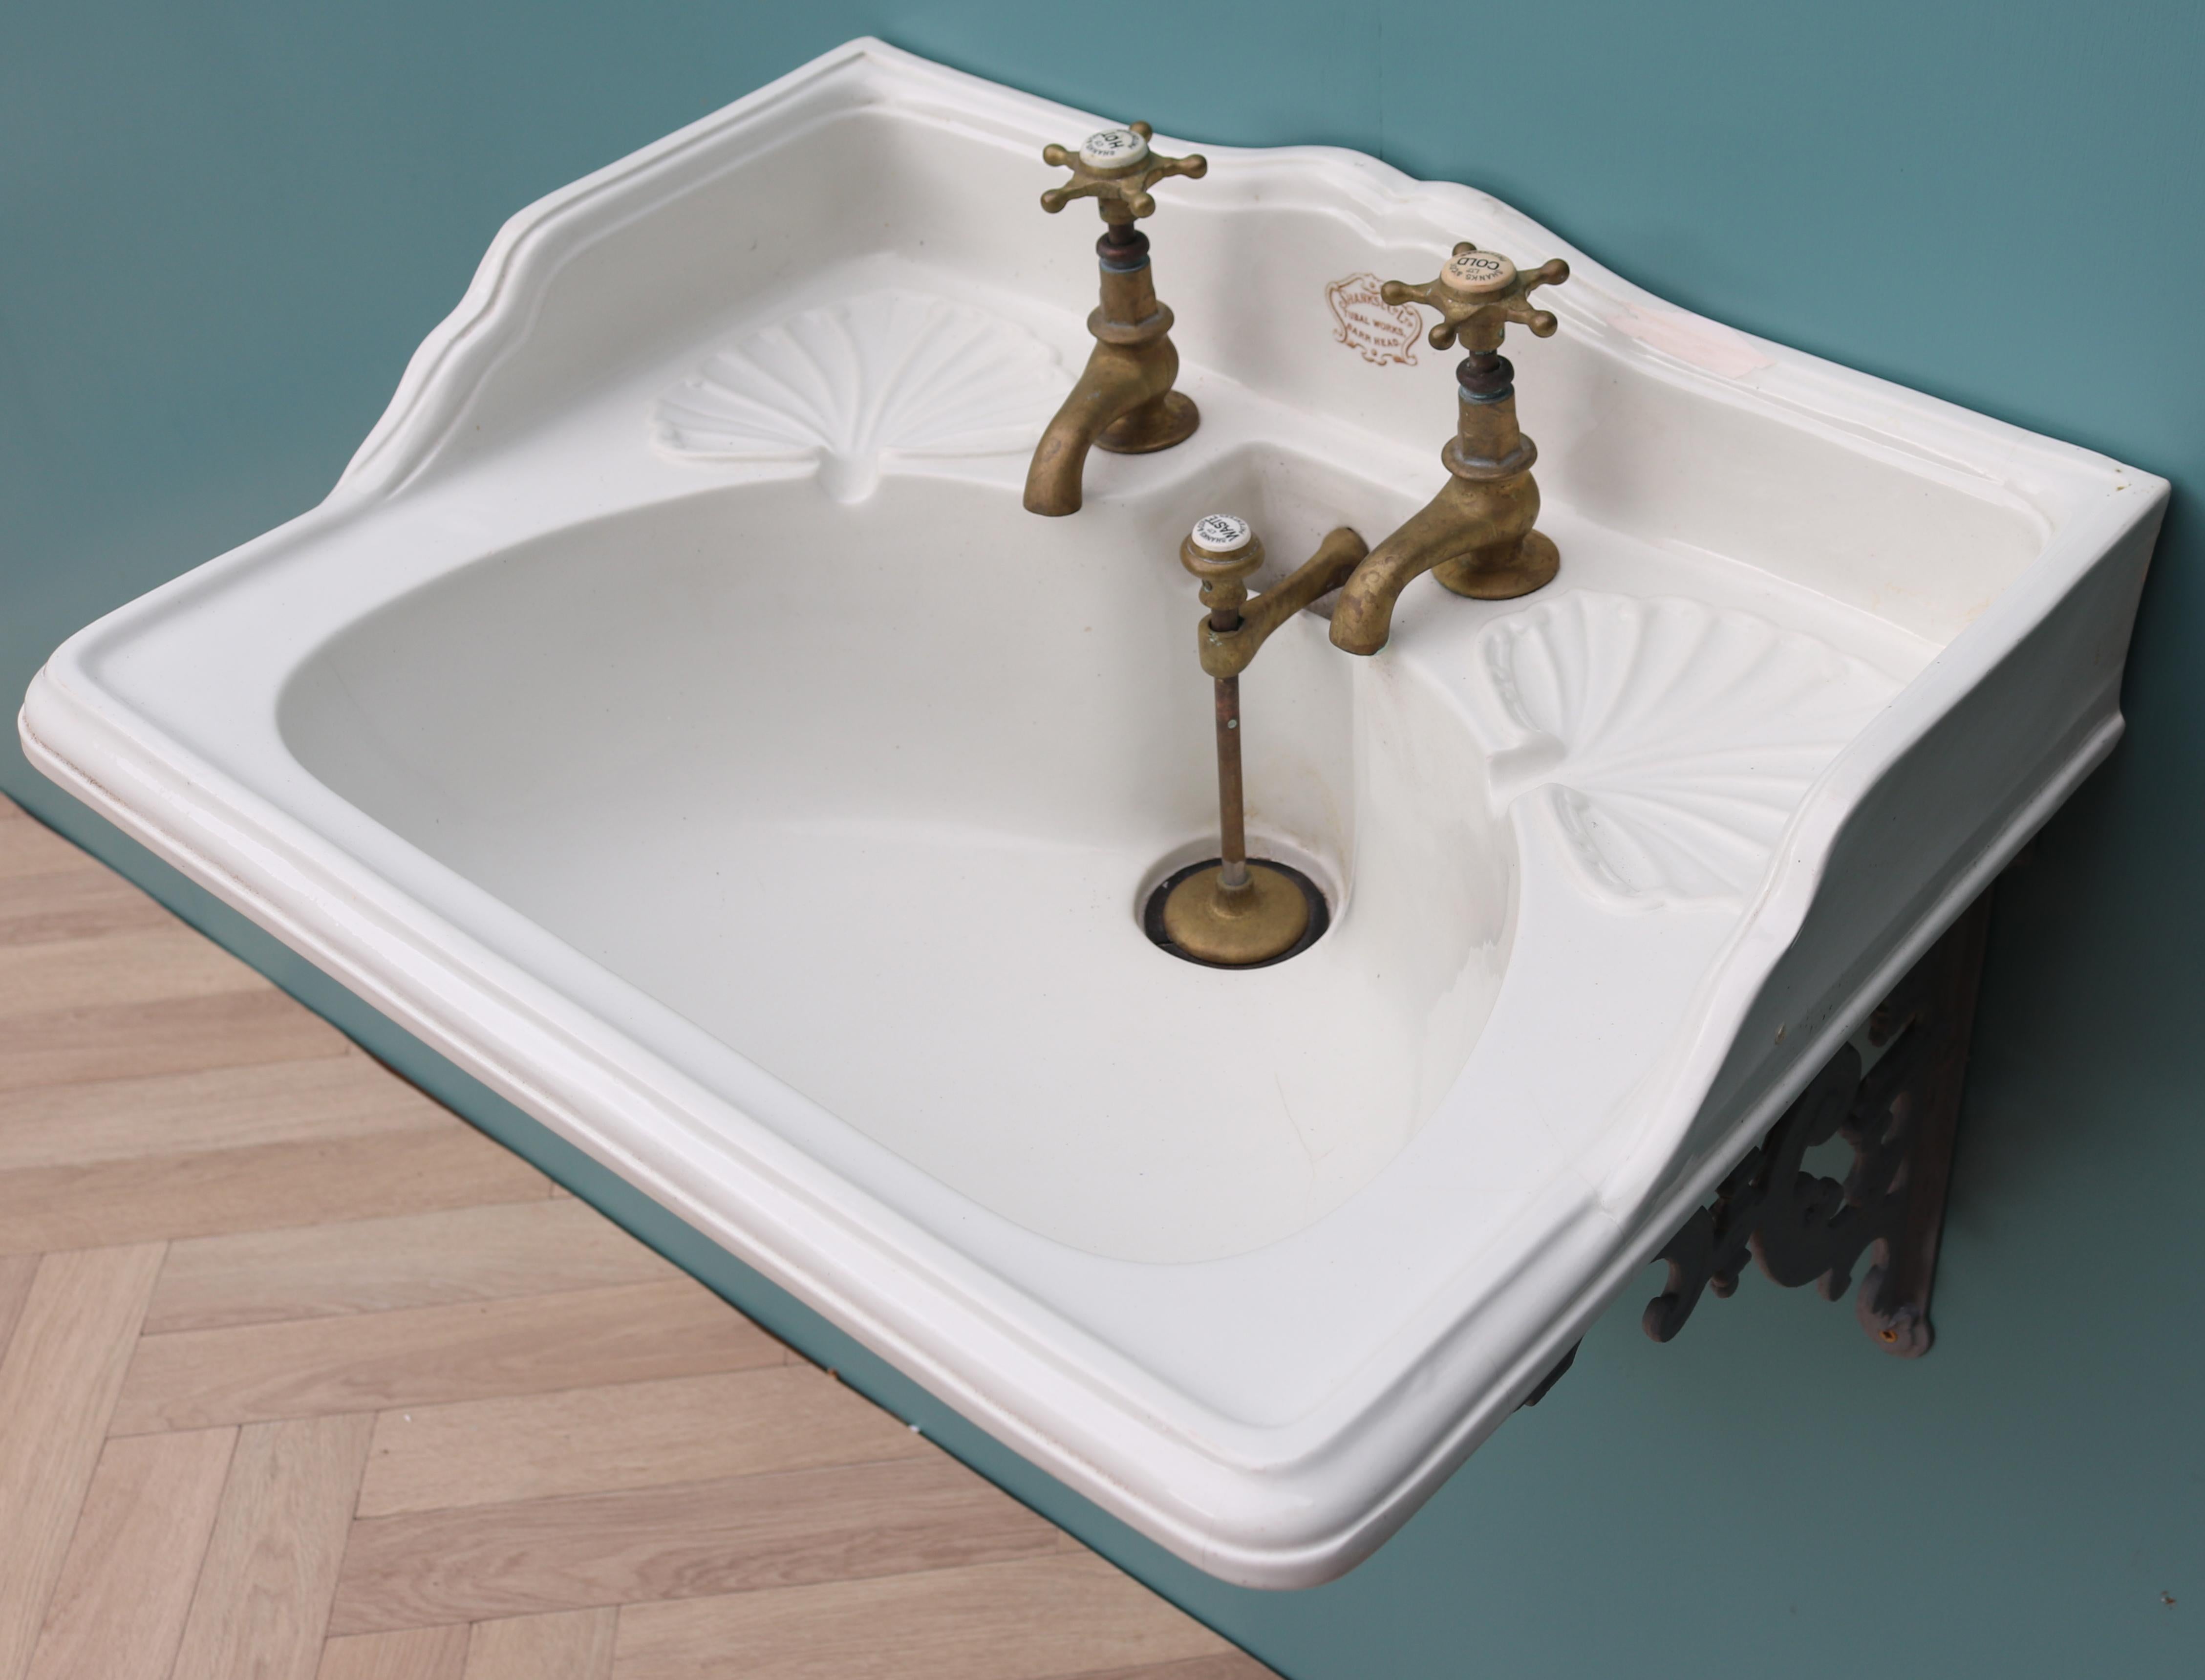 19th Century Antique ‘Shanks & Co.’ Wash Basin or Sink